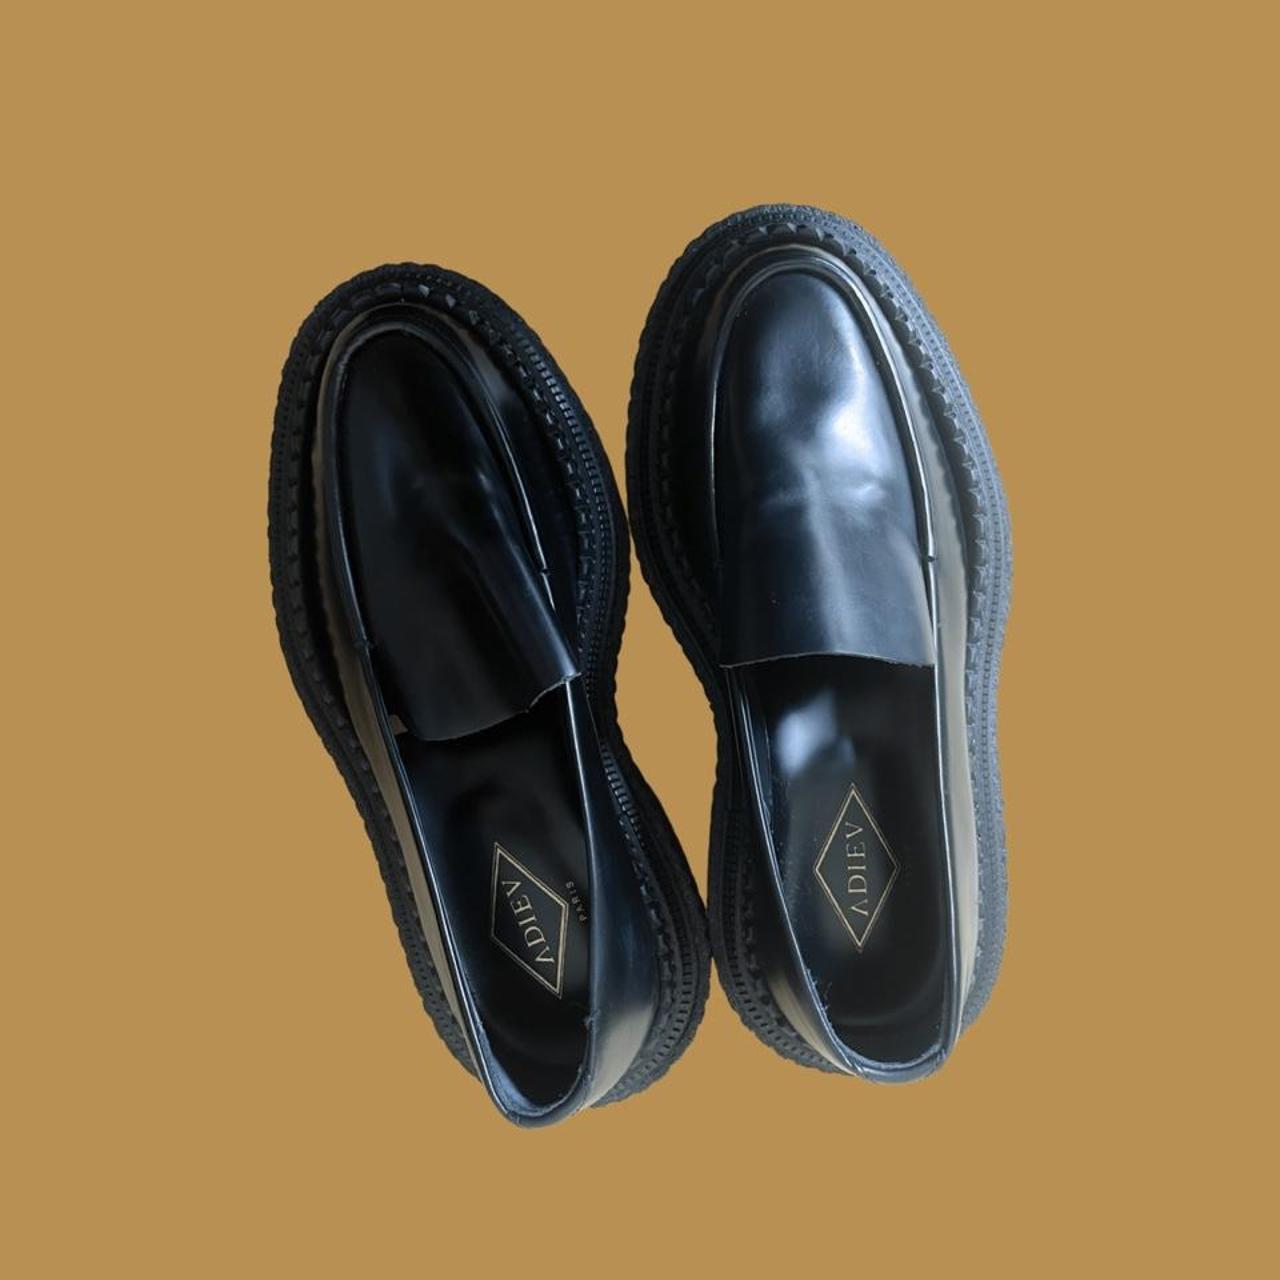 Product Image 1 - Womens Adieu Loafer from France
Worn